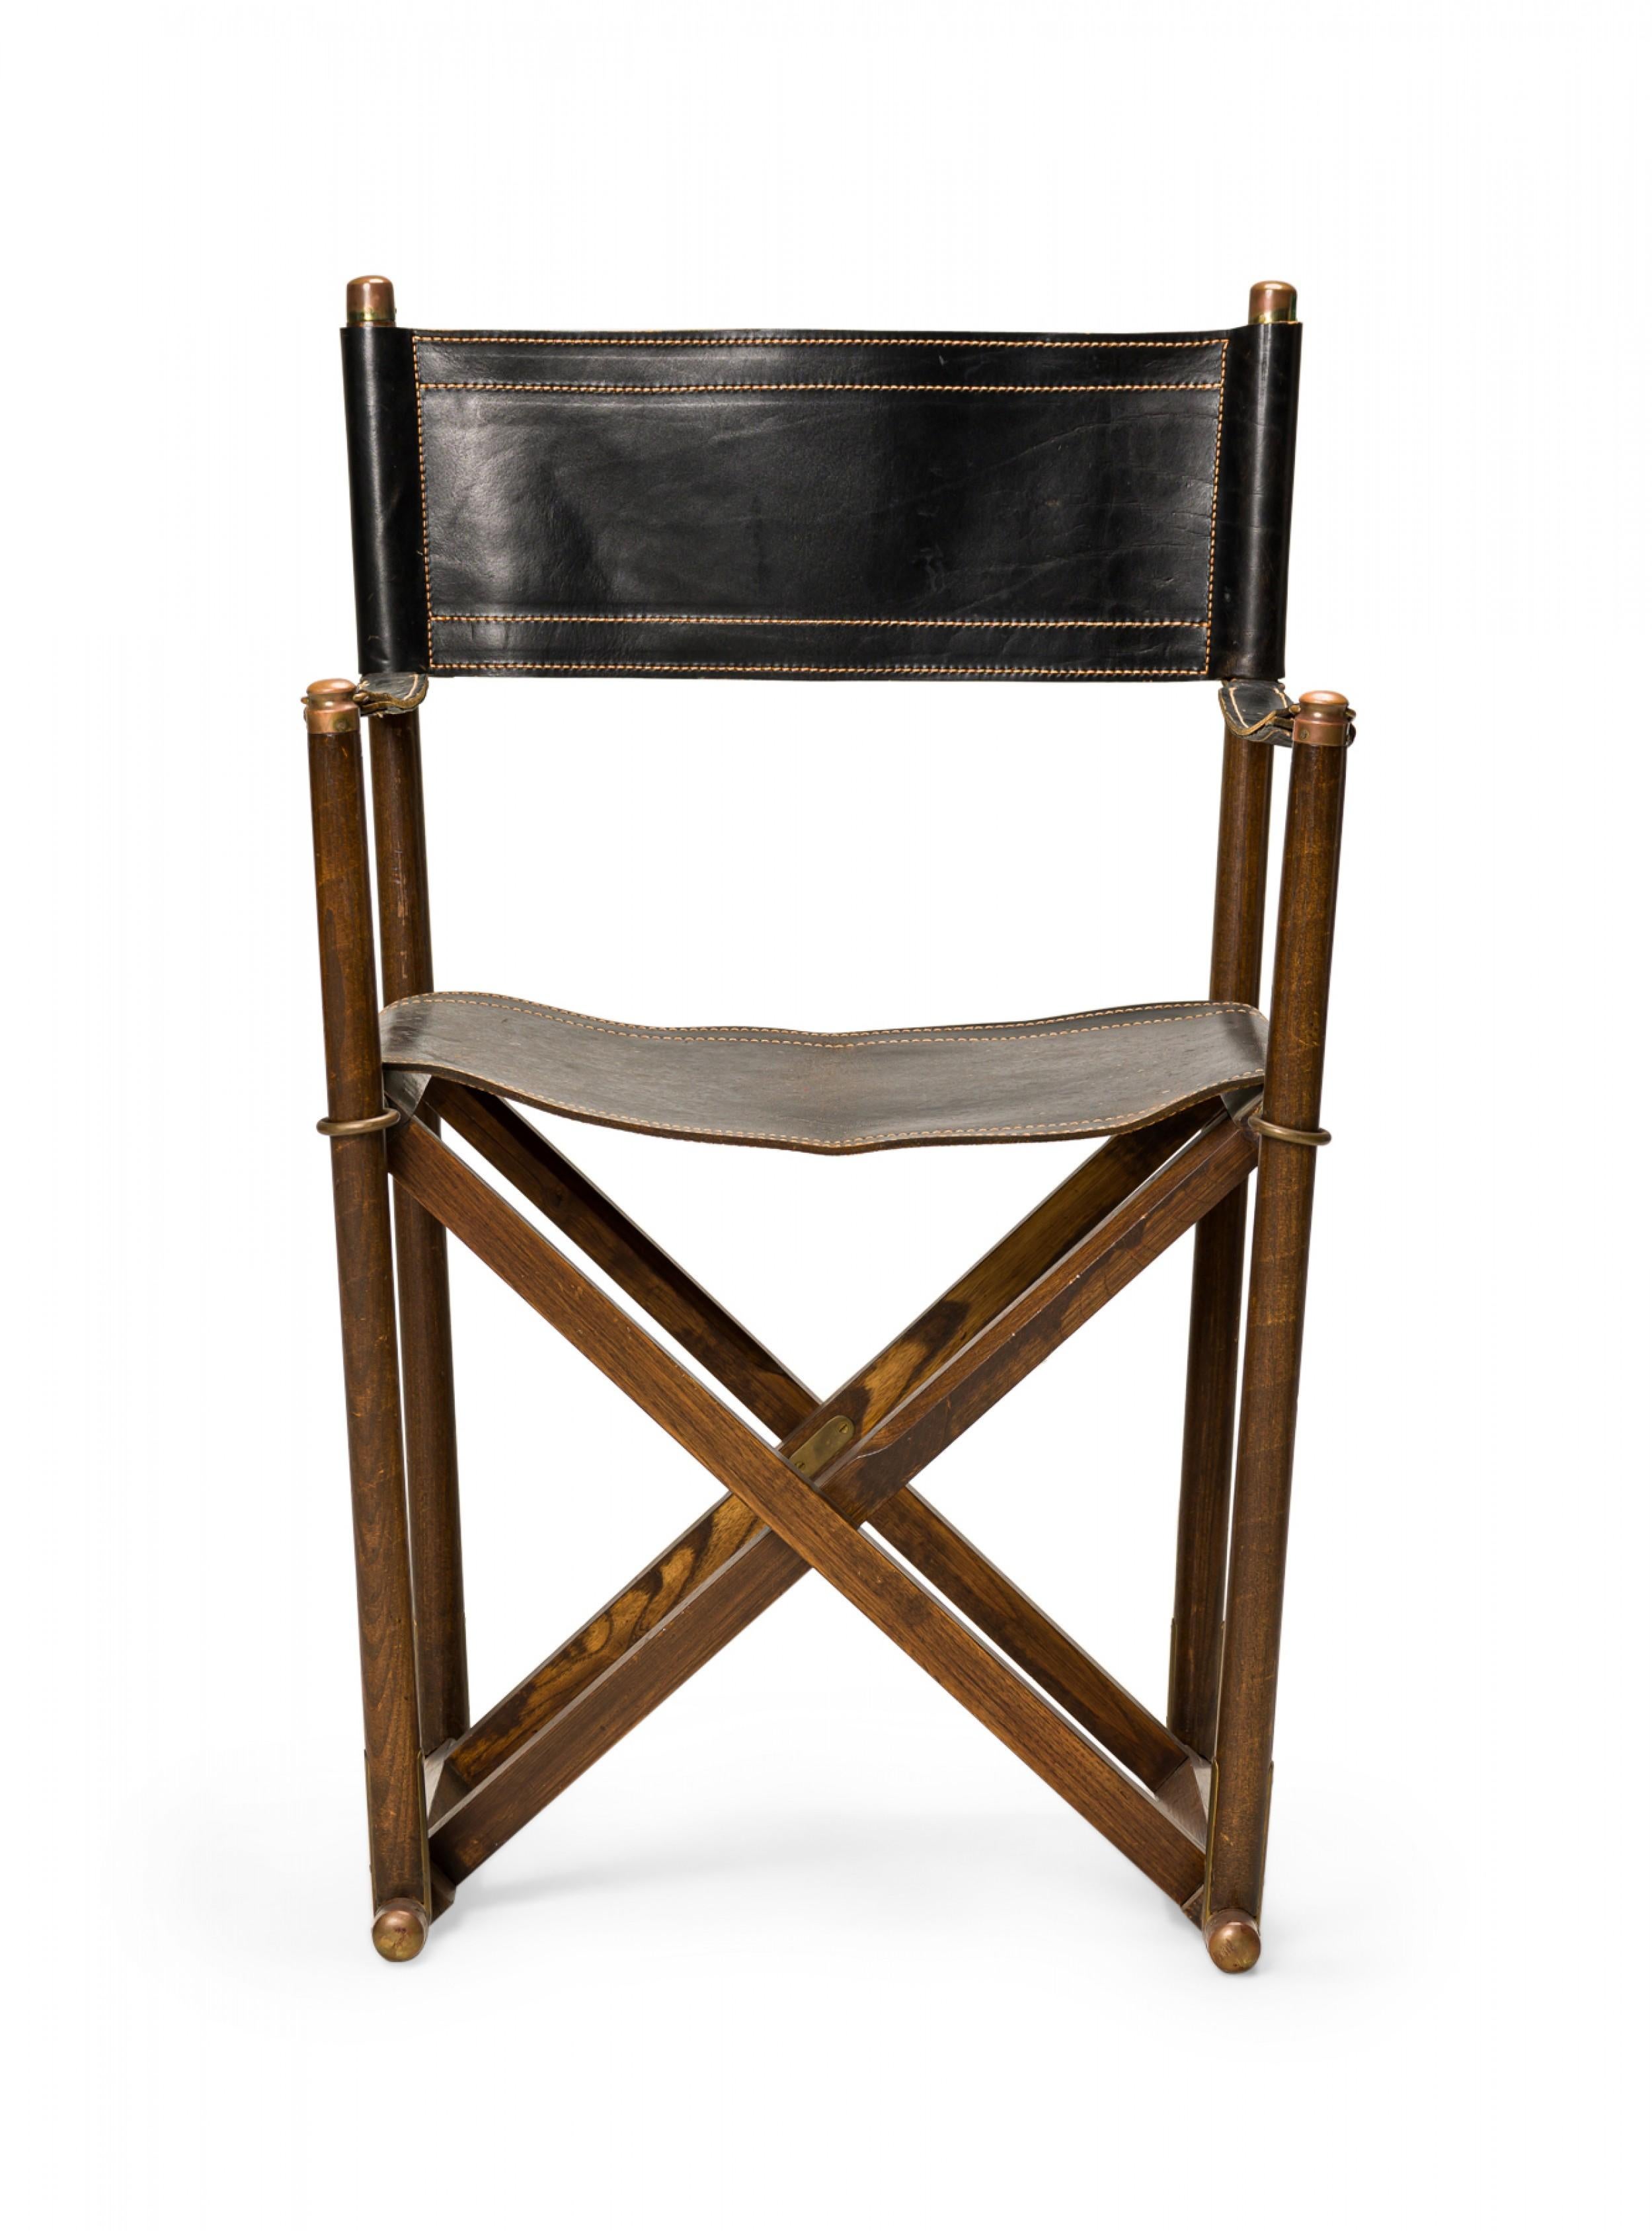 American Mid-Century folding campaign / director's chairs with walnut frames and black stitched leather sling backs, seats, and arms. (SARREID)(PRICED AS PAIR)